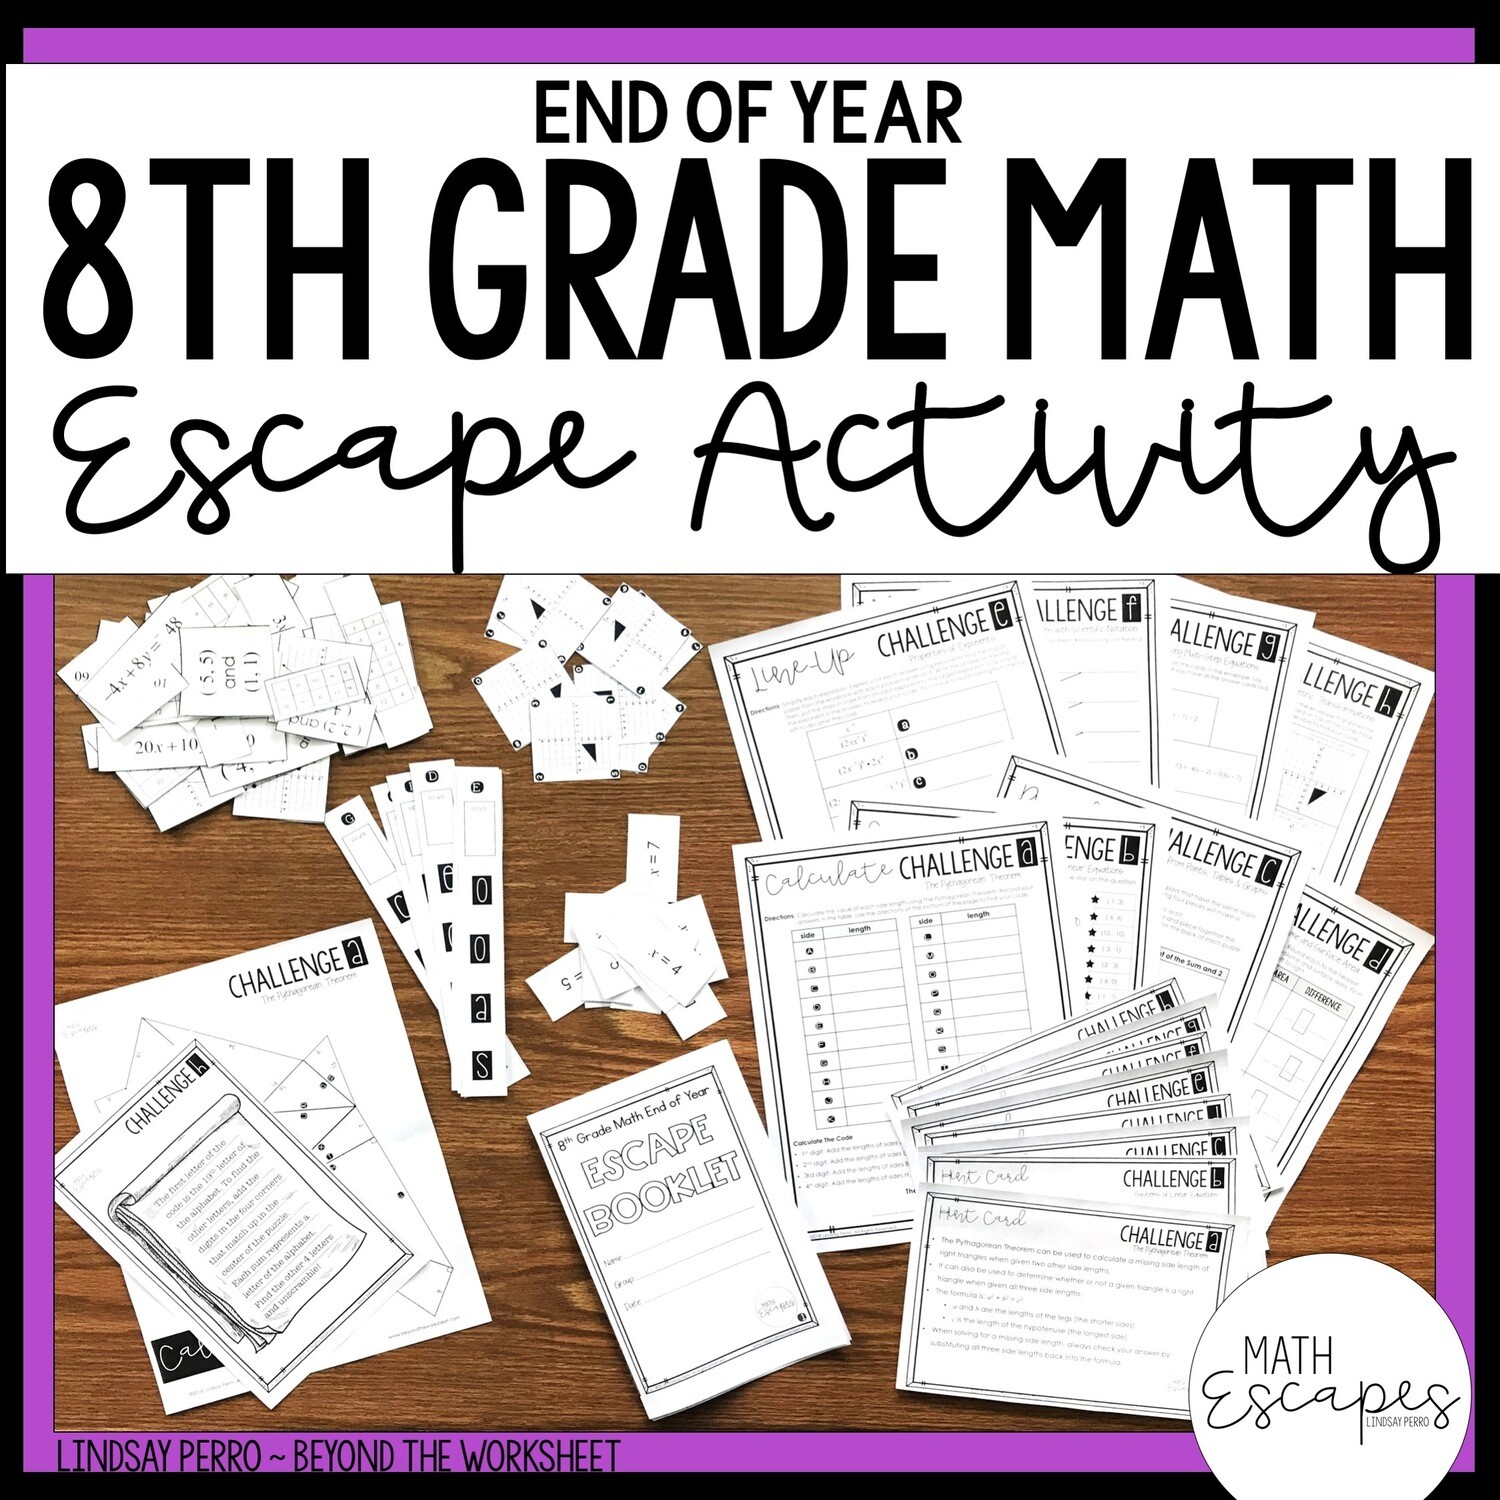 8th-grade-math-end-of-year-escape-room-activity